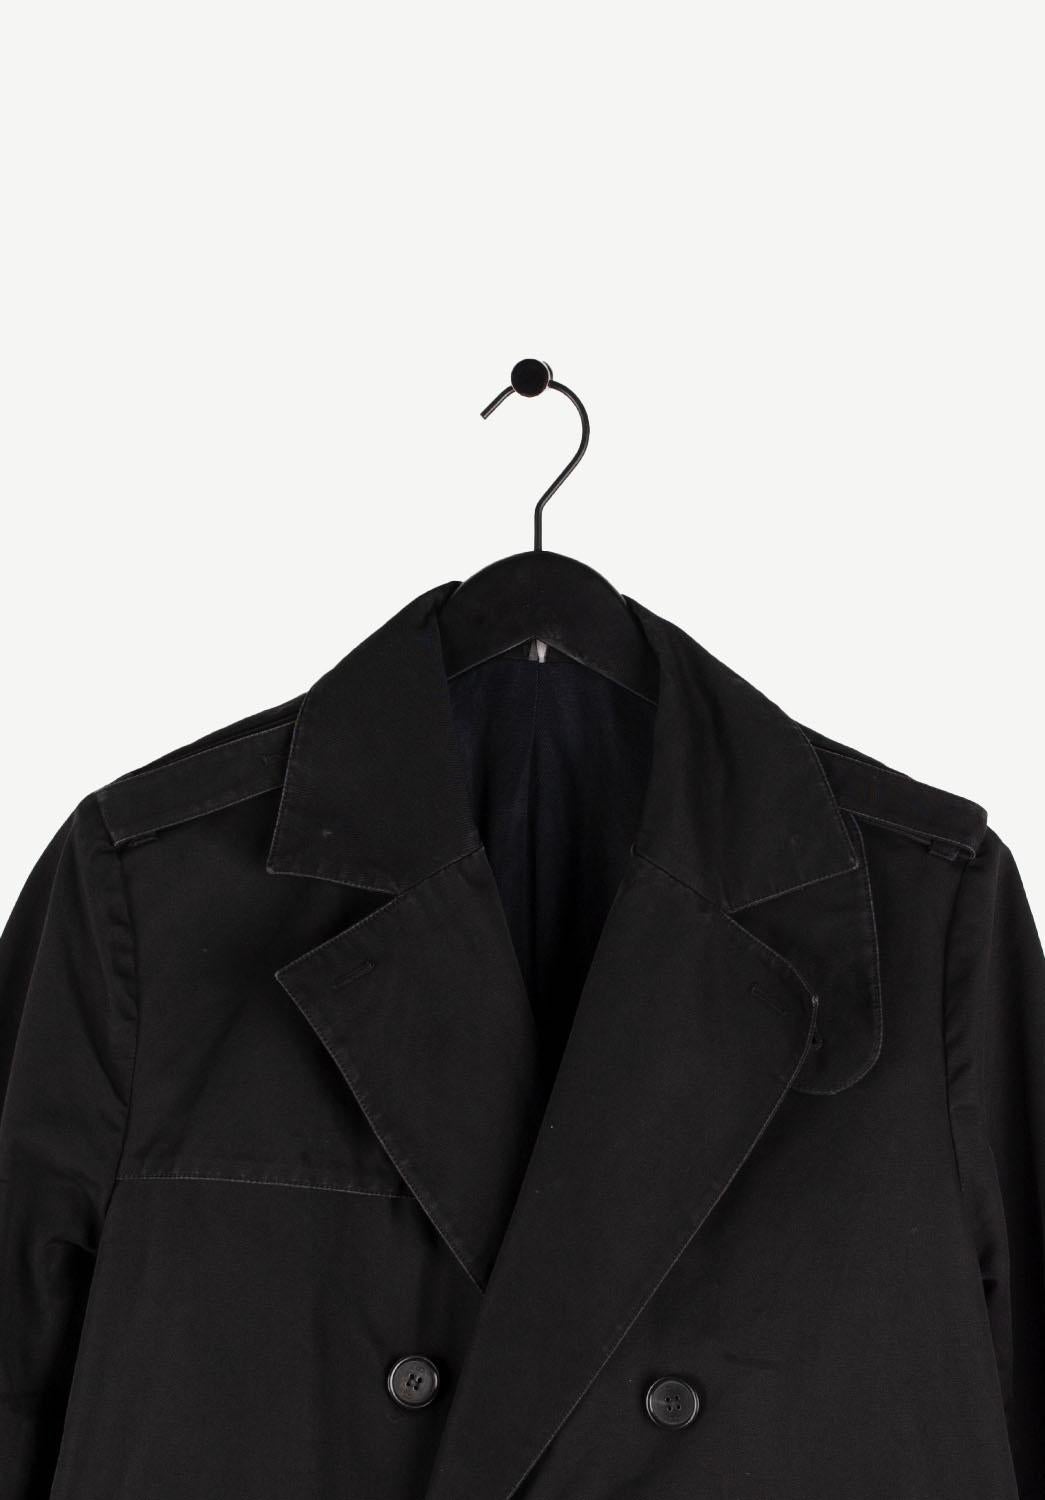 Item for sale is 100% genuine Dior Homme AW03 Men Trench Coat S075
It looks like it has two belt loops but belt is not present with the coat.
Color: Black
(An actual color may a bit vary due to individual computer screen interpretation)
Material: